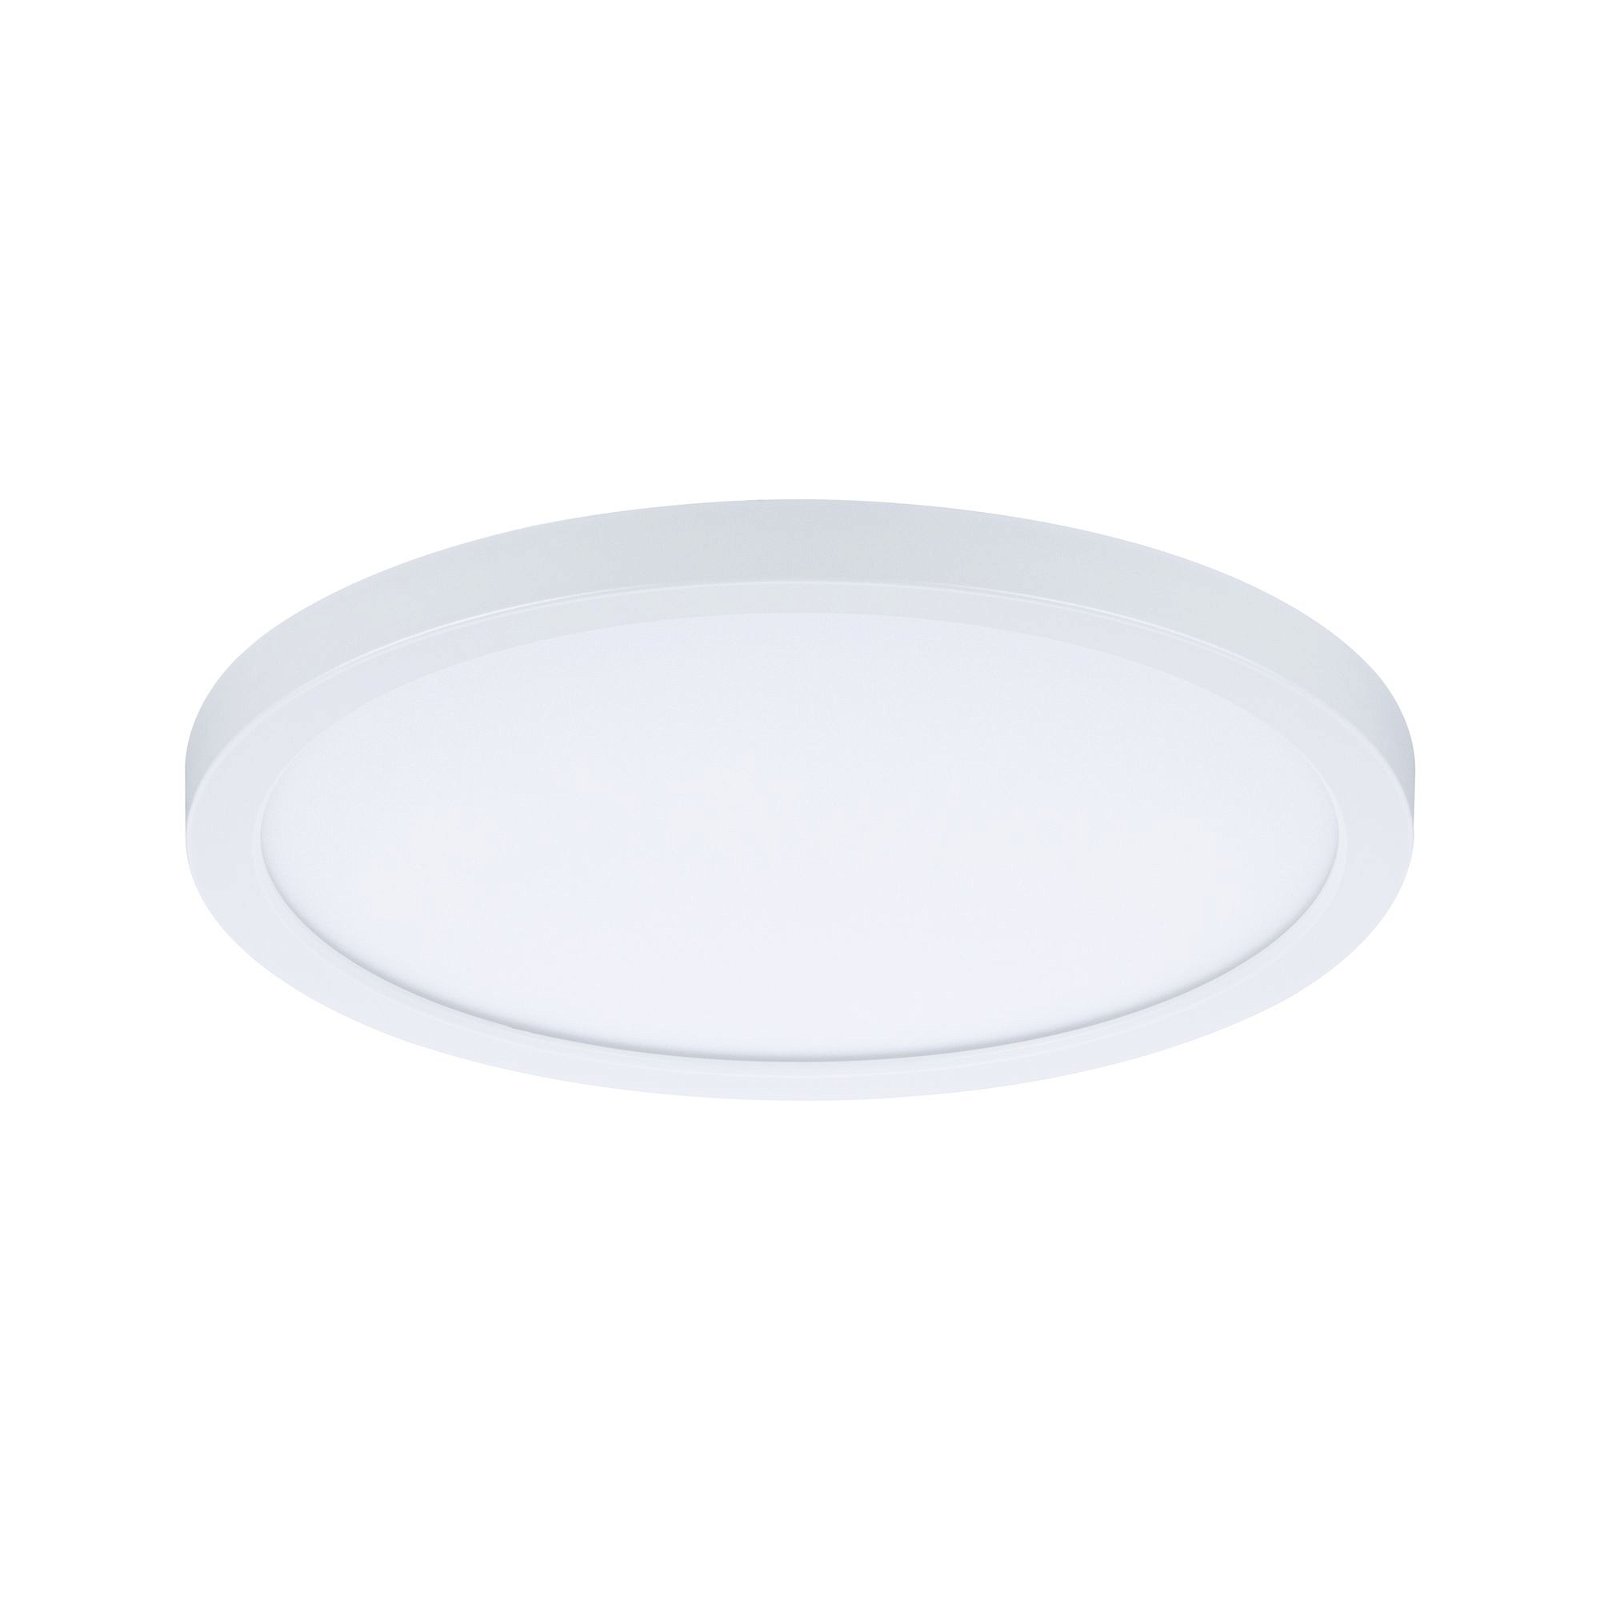 VariFit LED Recessed panel 3-Step-Dim Areo IP44 round 175mm 13W 1200lm 3000K White dimmable